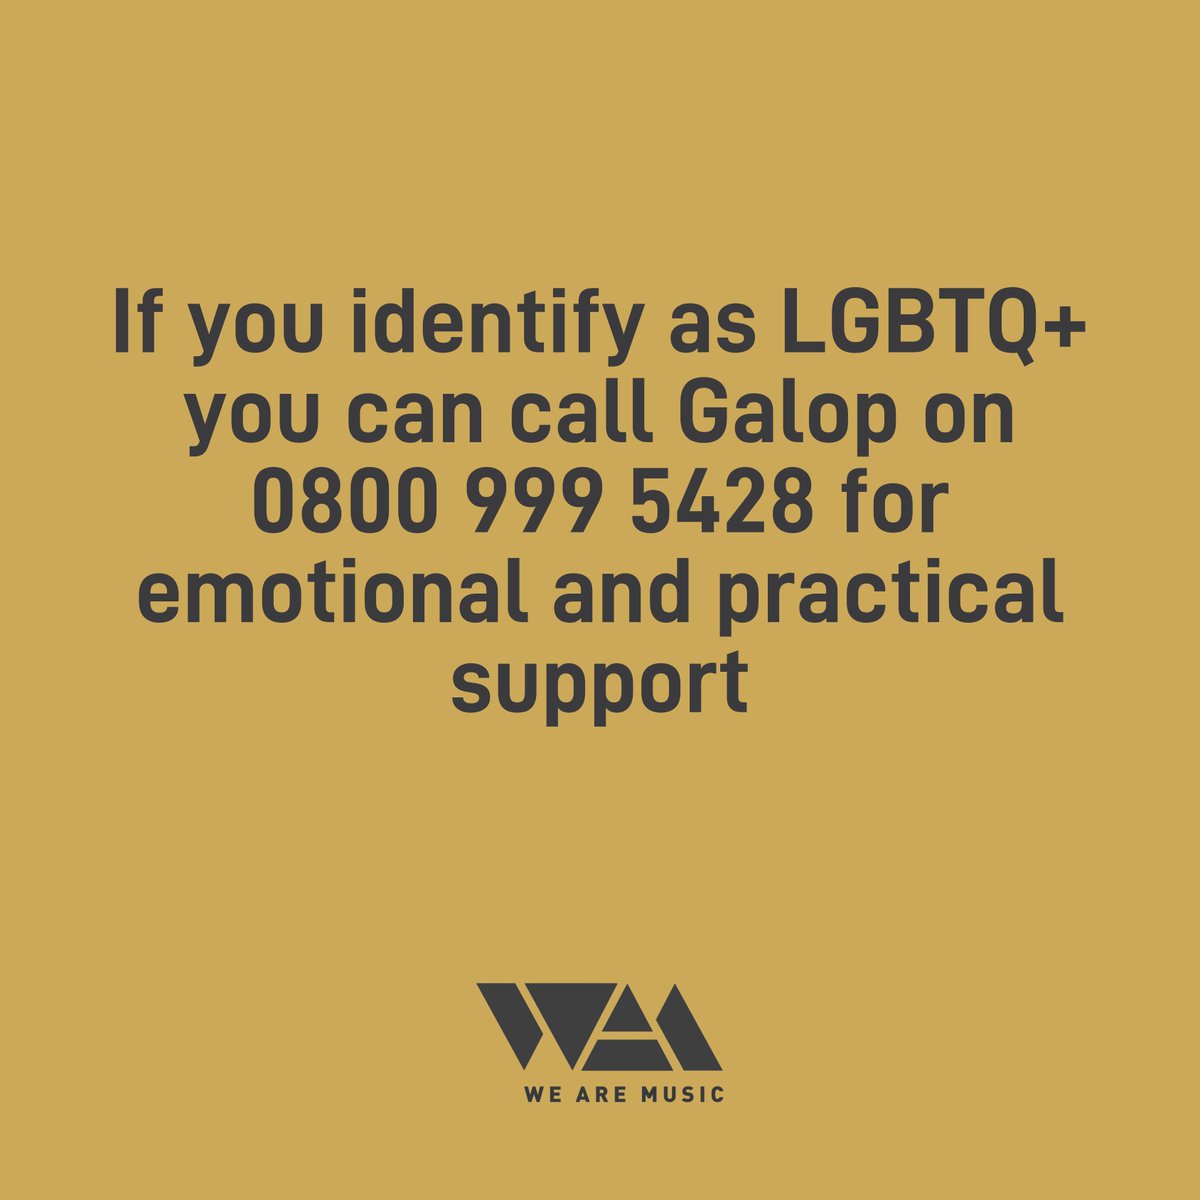 If you identify as LGBTQ+, you can call @GalopUK on 0800 999 5428 for emotional and practical support.

Let's continue to support and uplift each other. 
#LGBTQ+ #Support #Galop